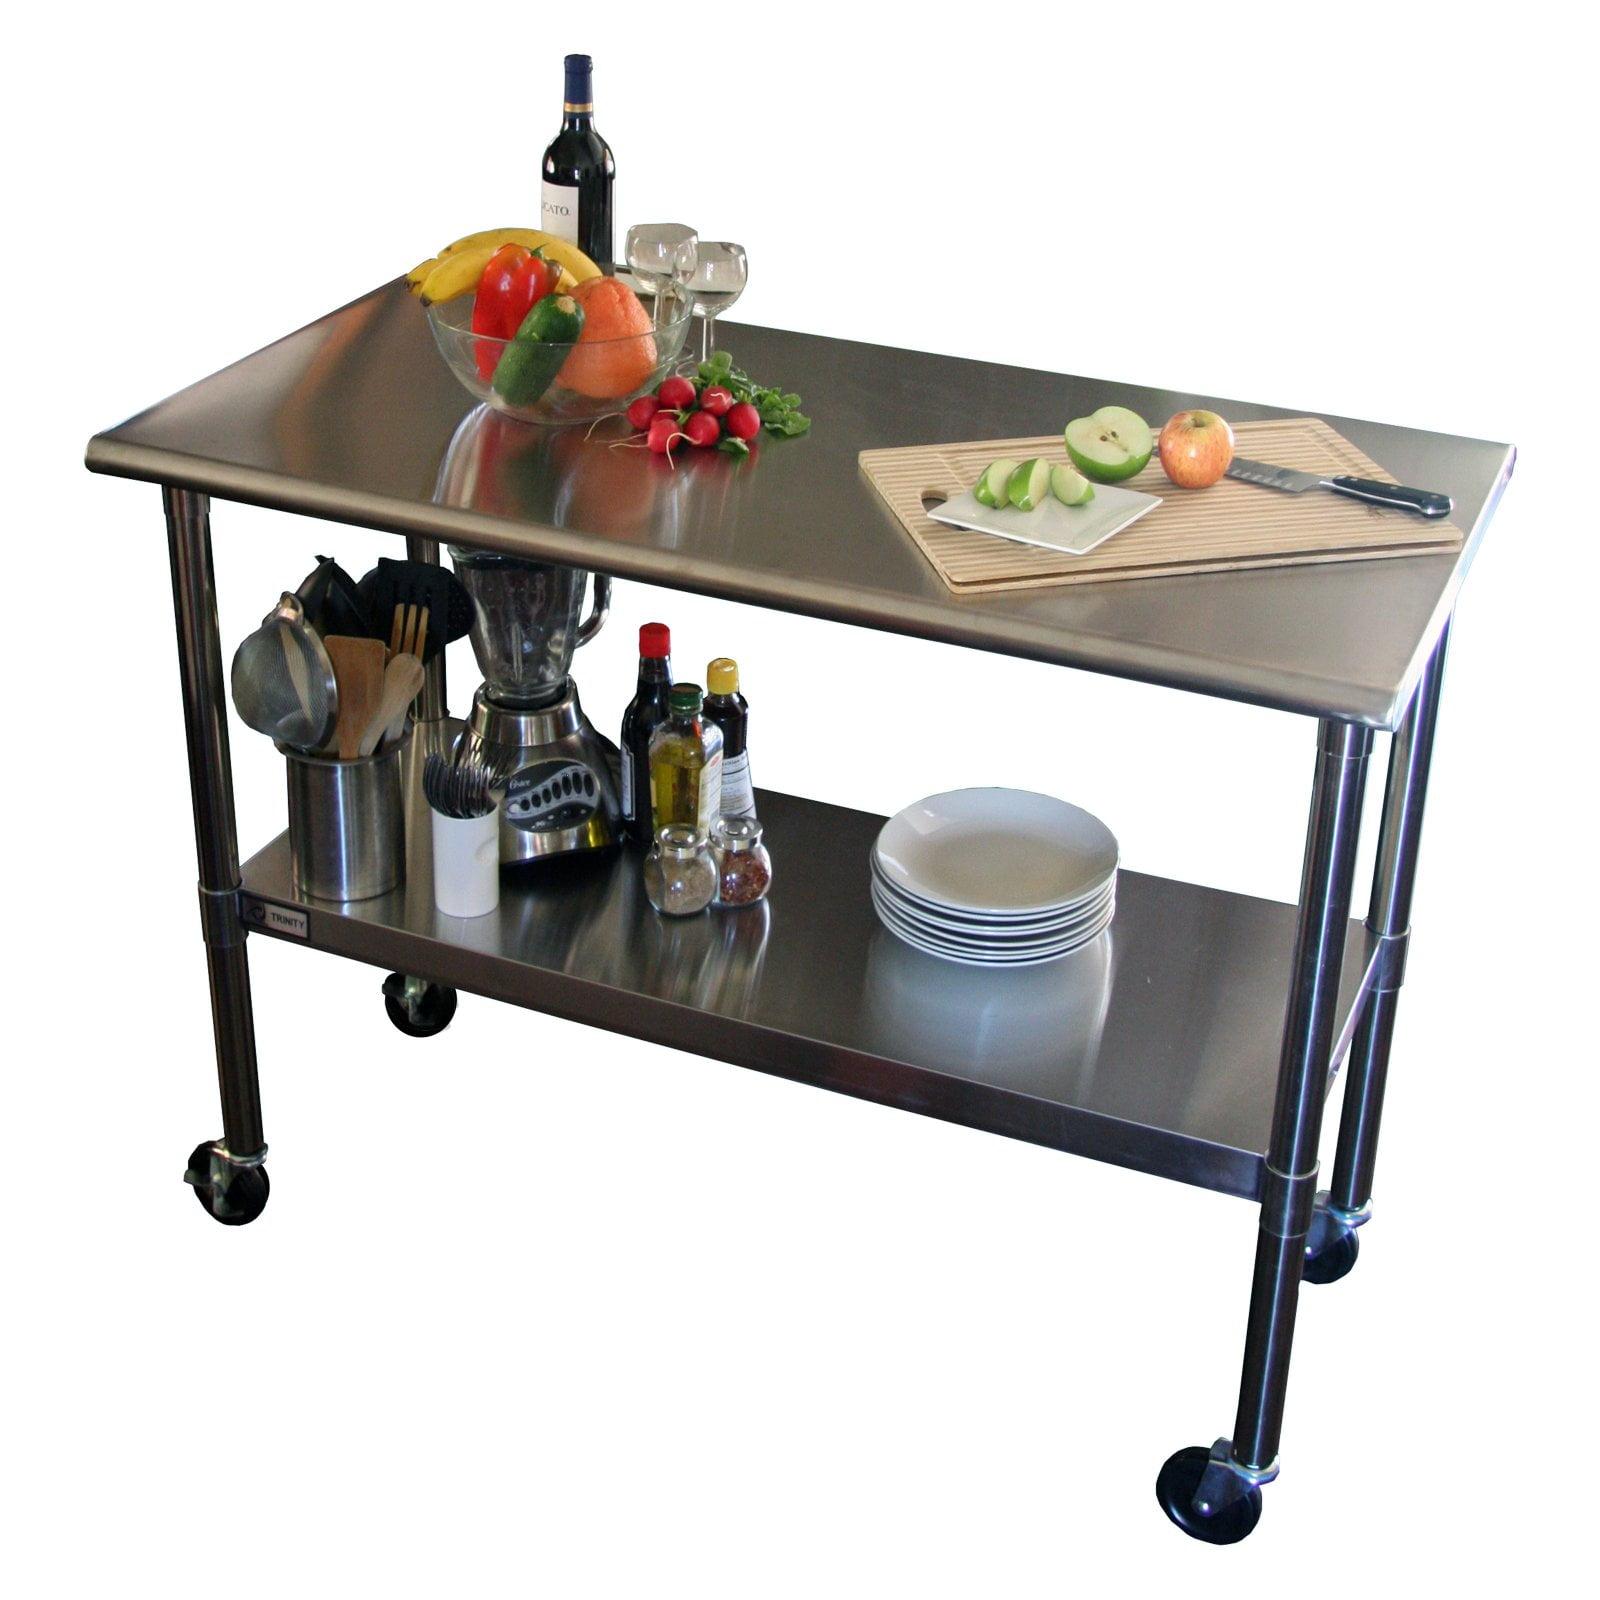 EcoStorage 48" Stainless Steel Portable Prep Table with Wheels